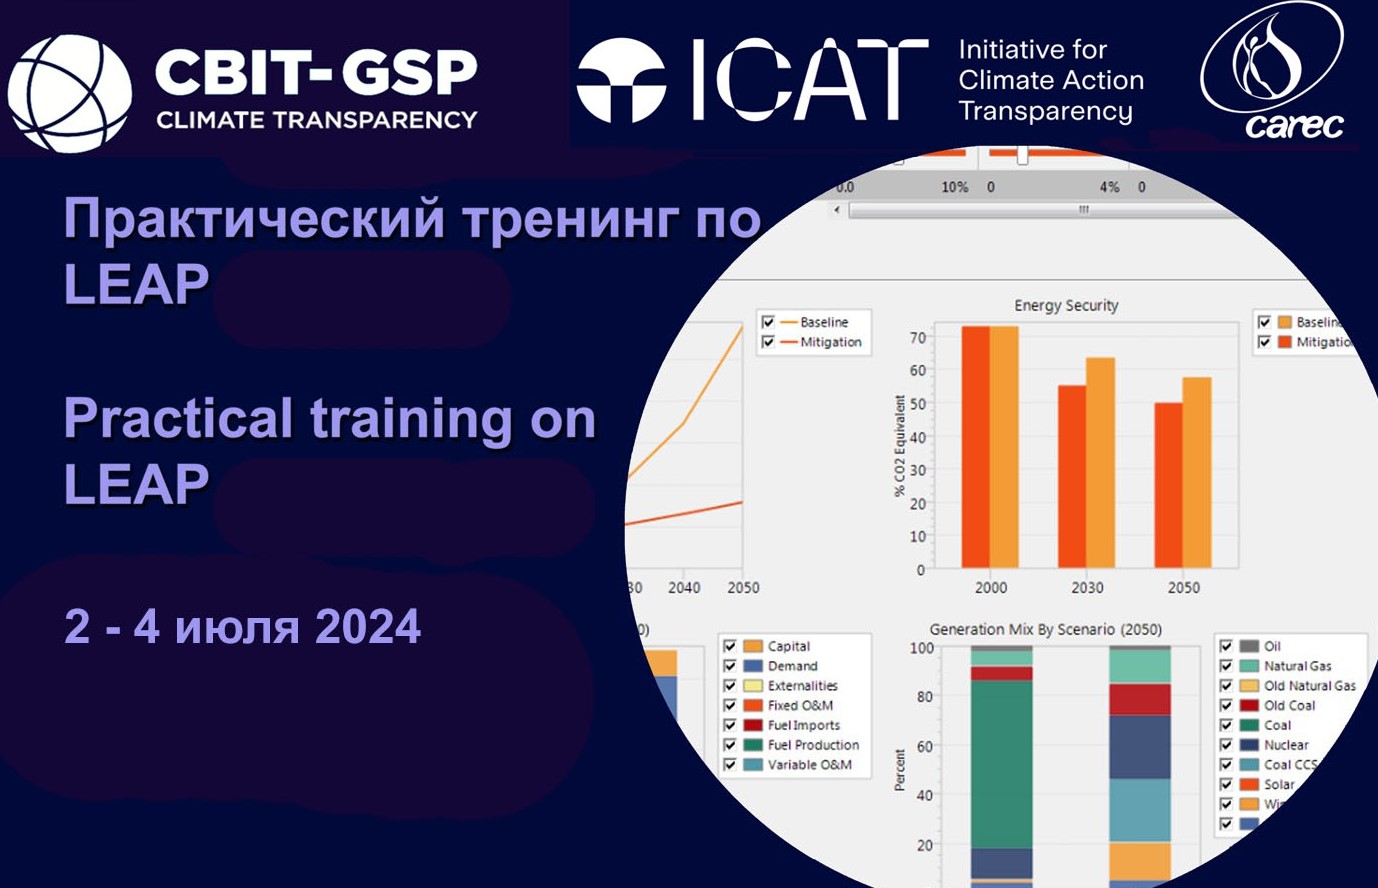 ReCATH is conducting a Low Emissions Analysis Platform (LEAP) training for professionals in the Central Asia and Caucasus region to improve energy policy analysis and climate change mitigation assessment 